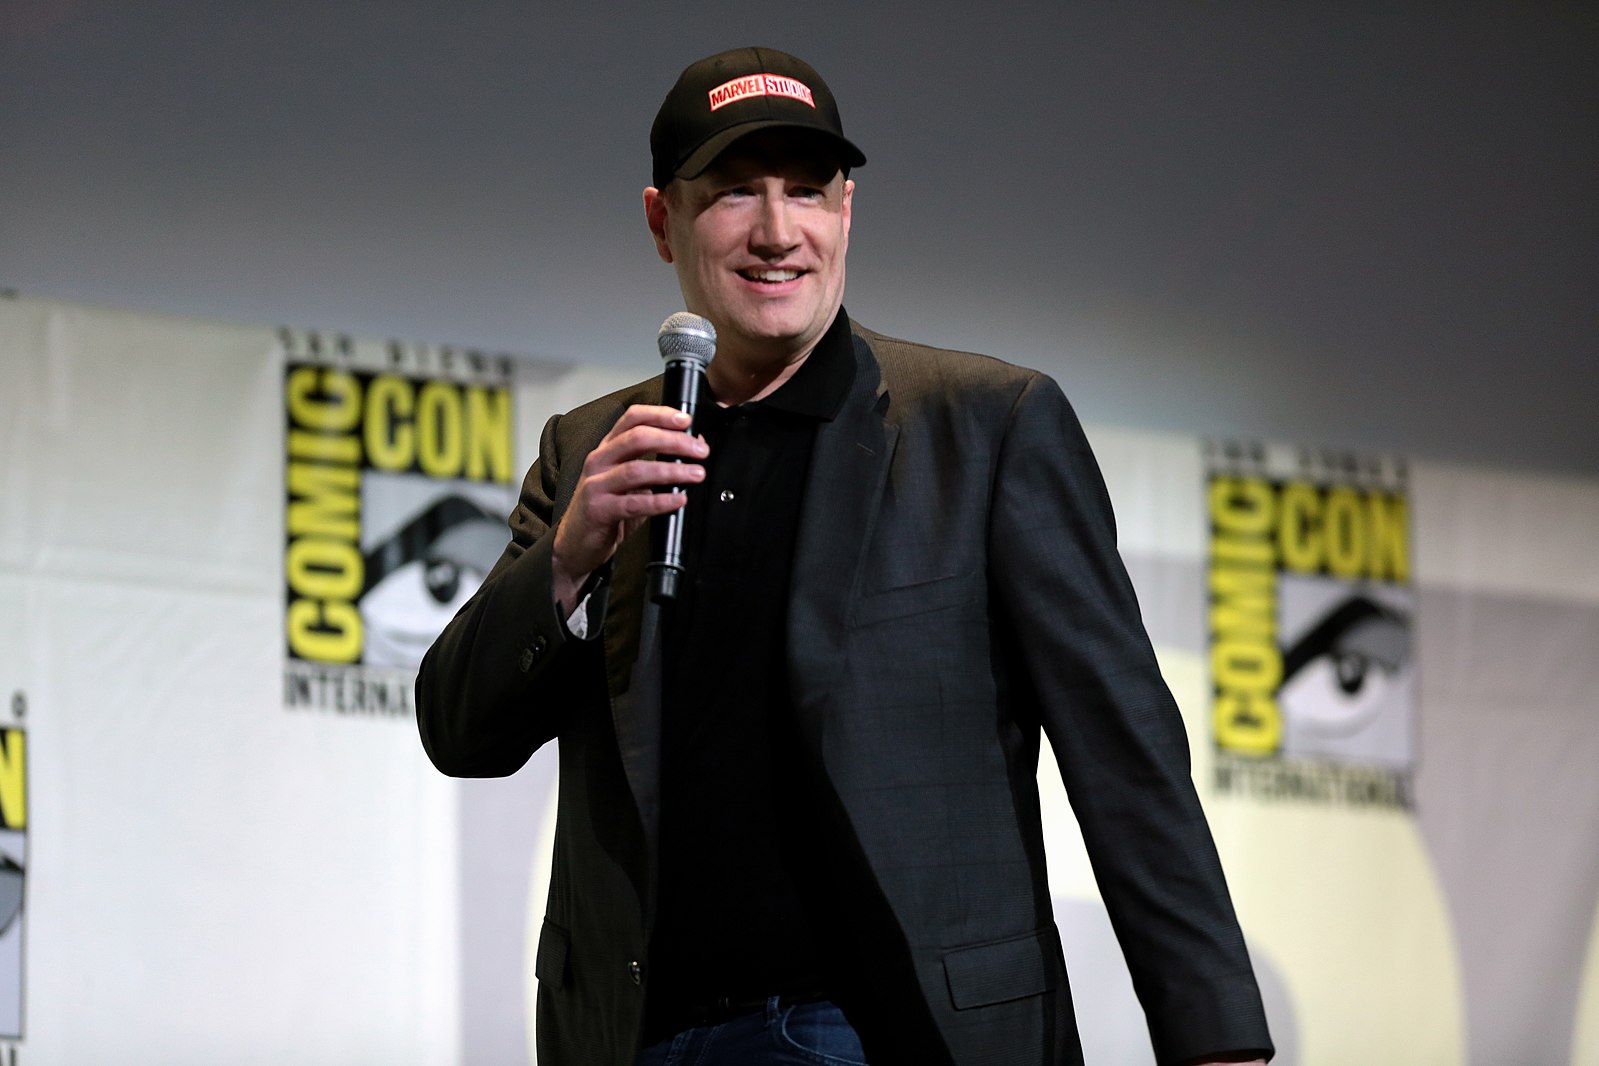 Report: Kevin Feige’s New Position At Marvel Could Mean Ike Perlmutter’s Time Is Up